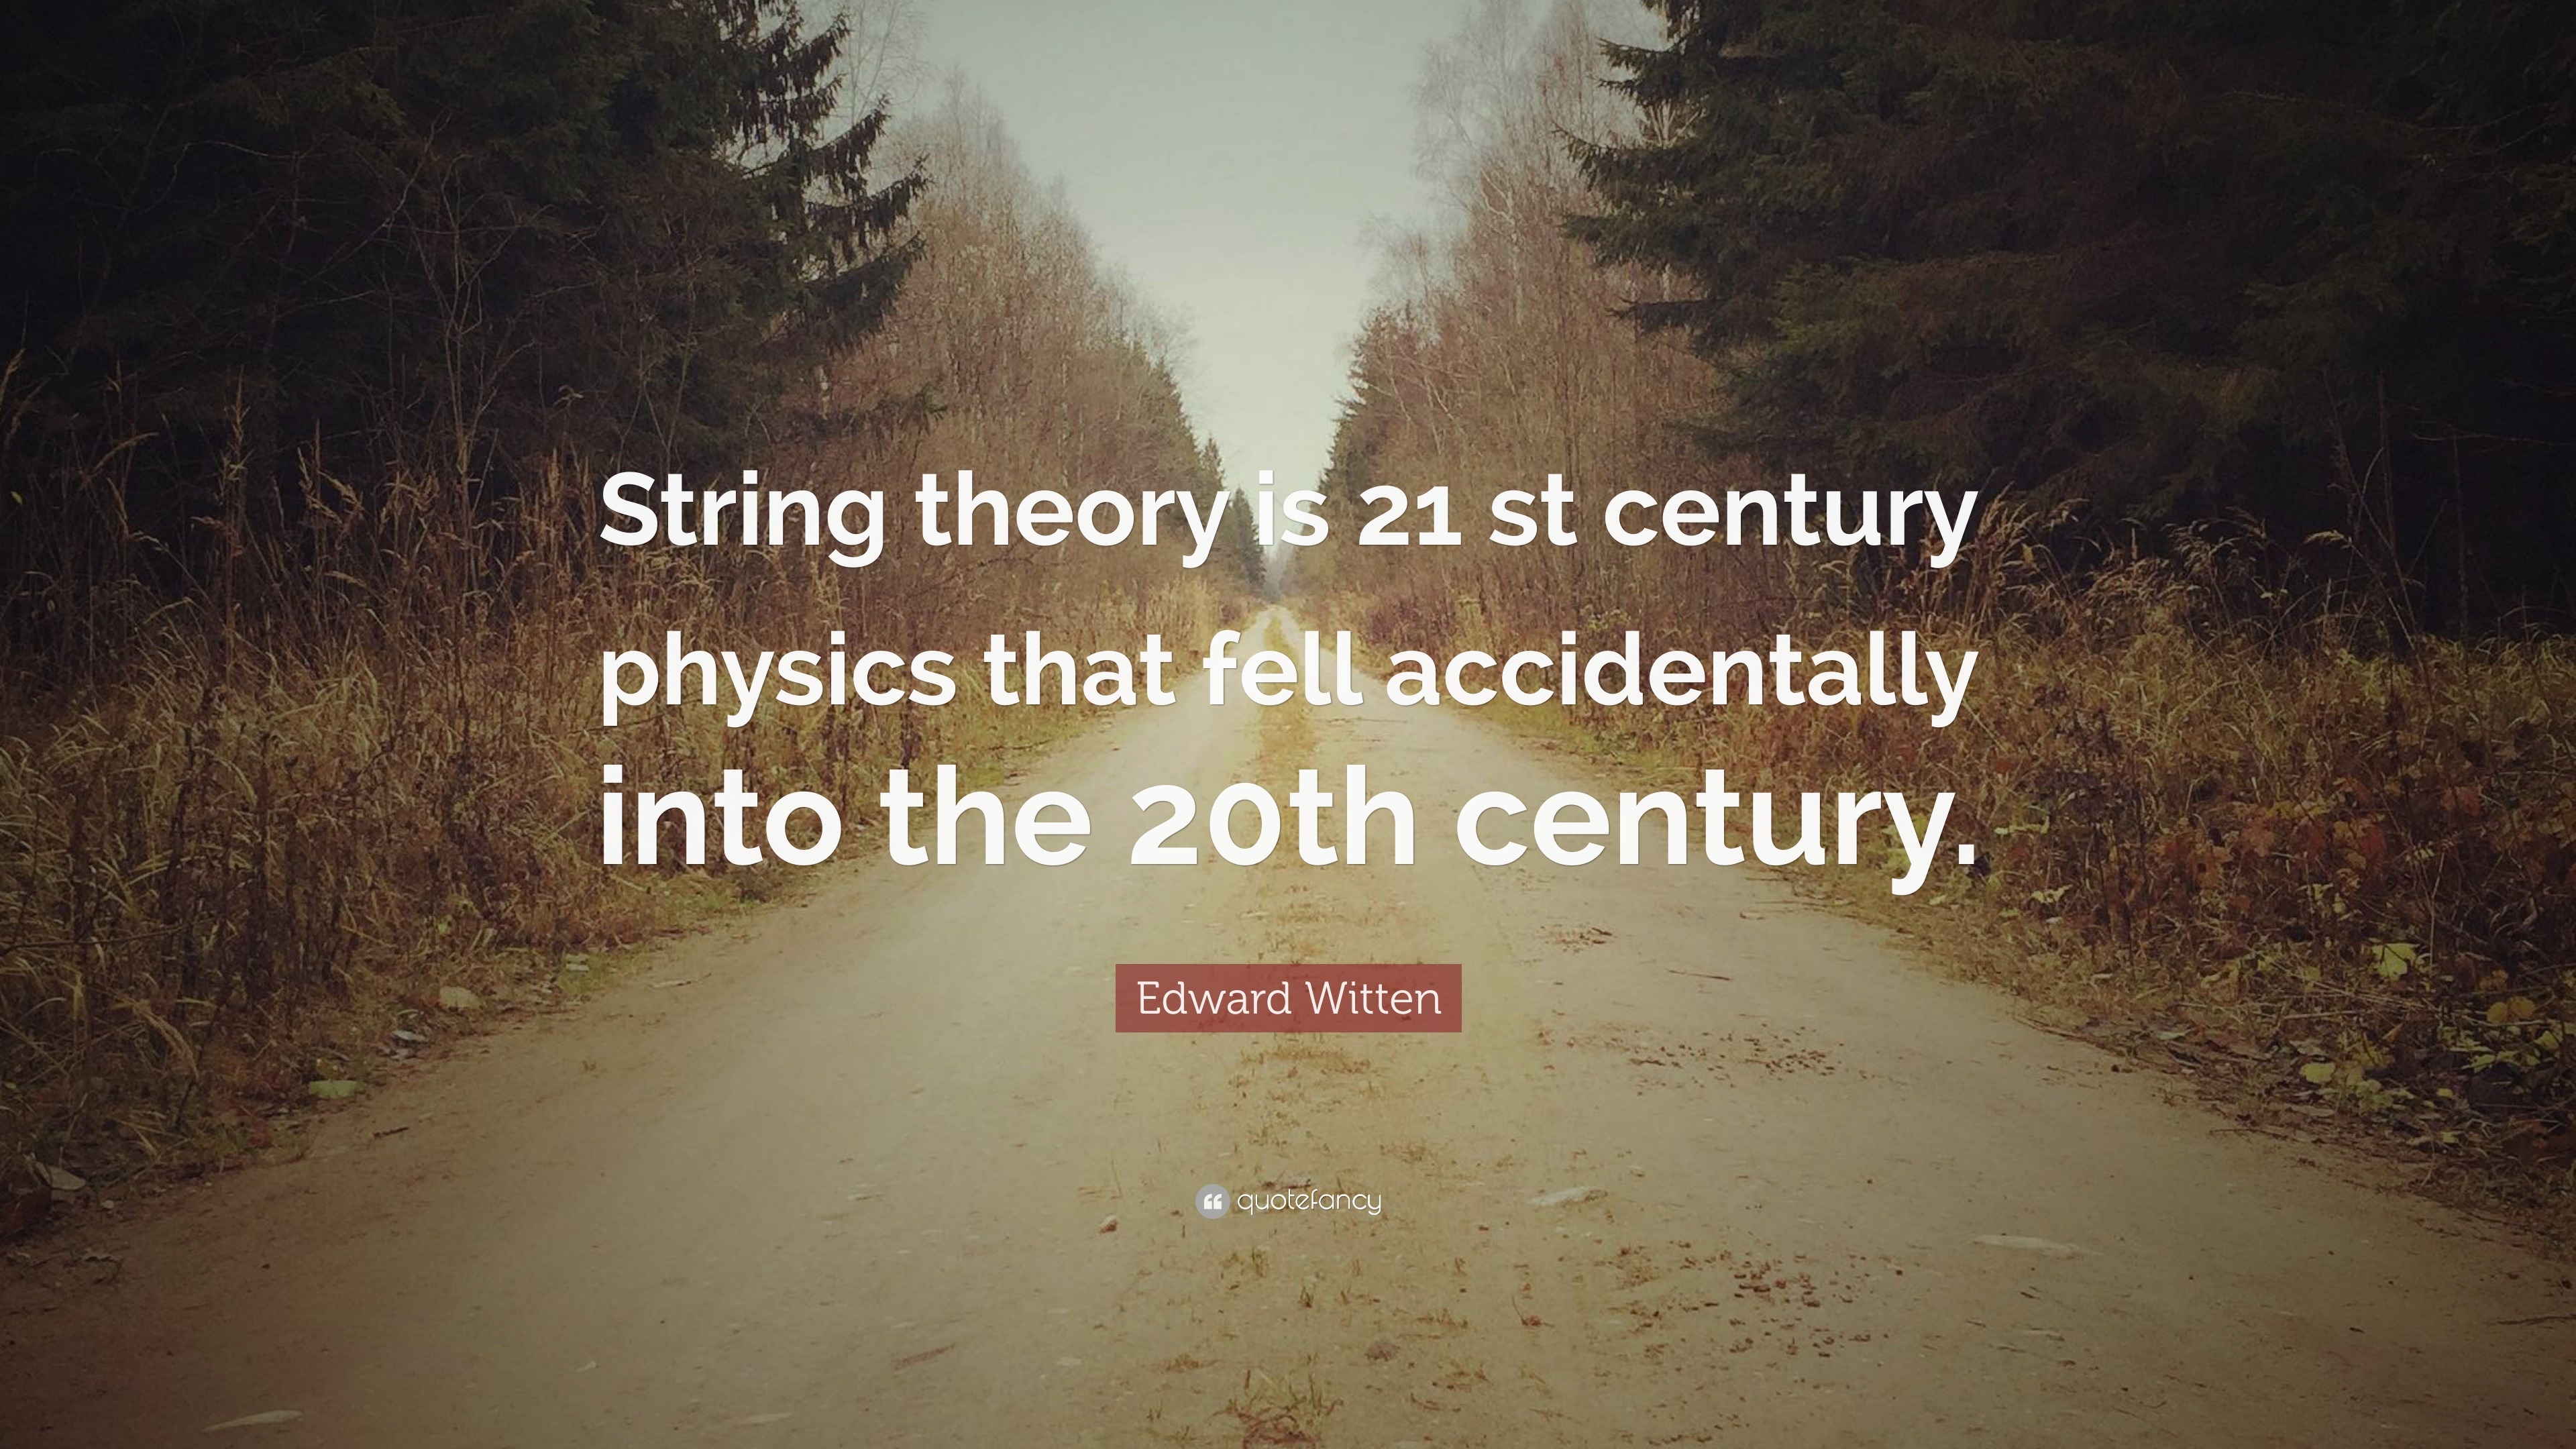 Edward Witten Quote: “String theory is 21 st century physics that fell